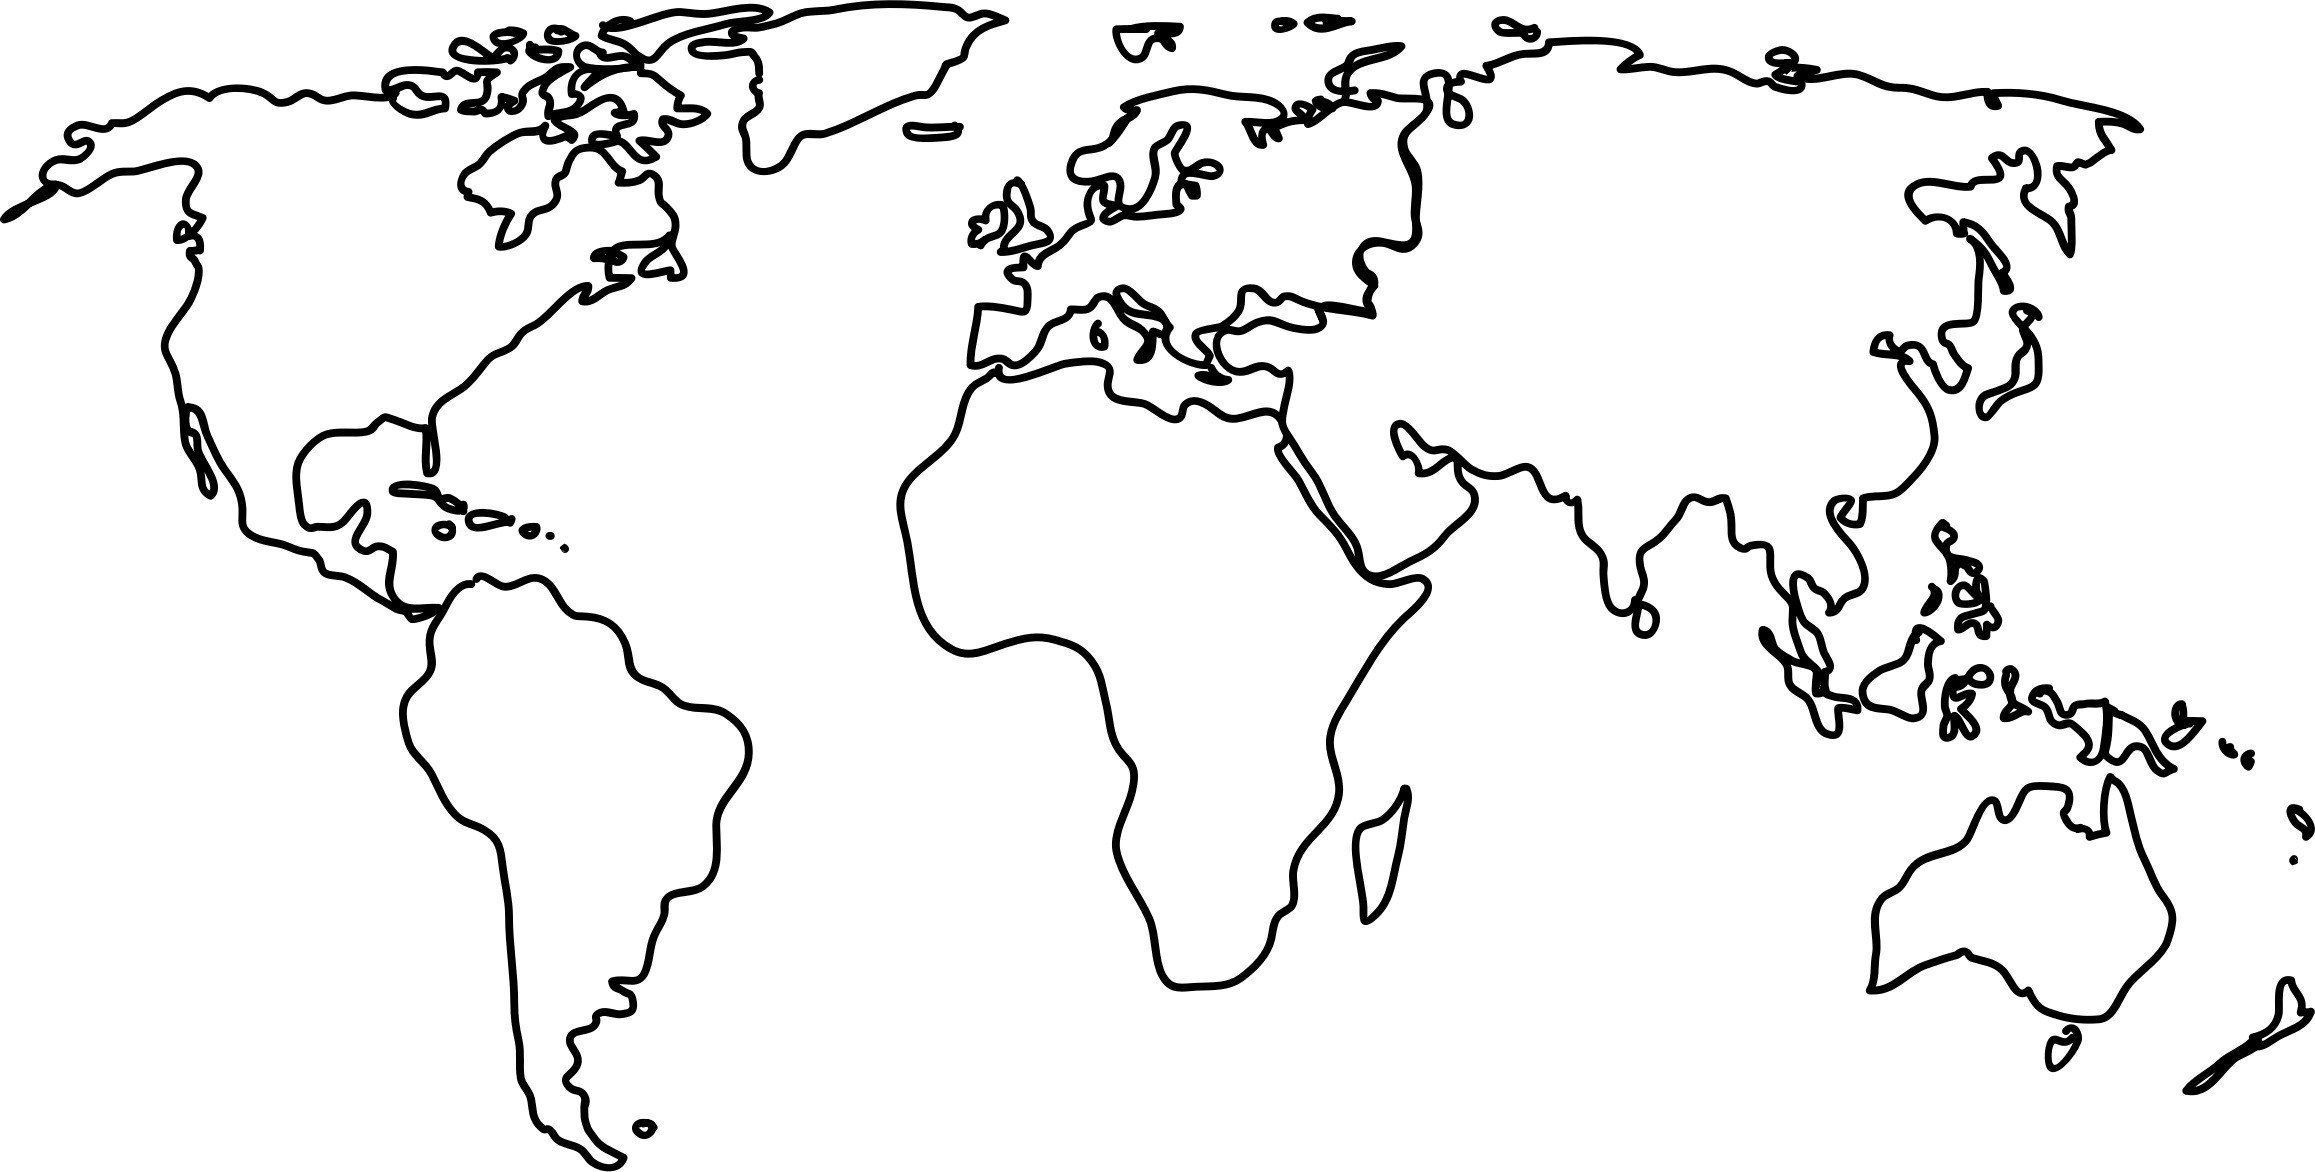 Printable Outline Map of the World